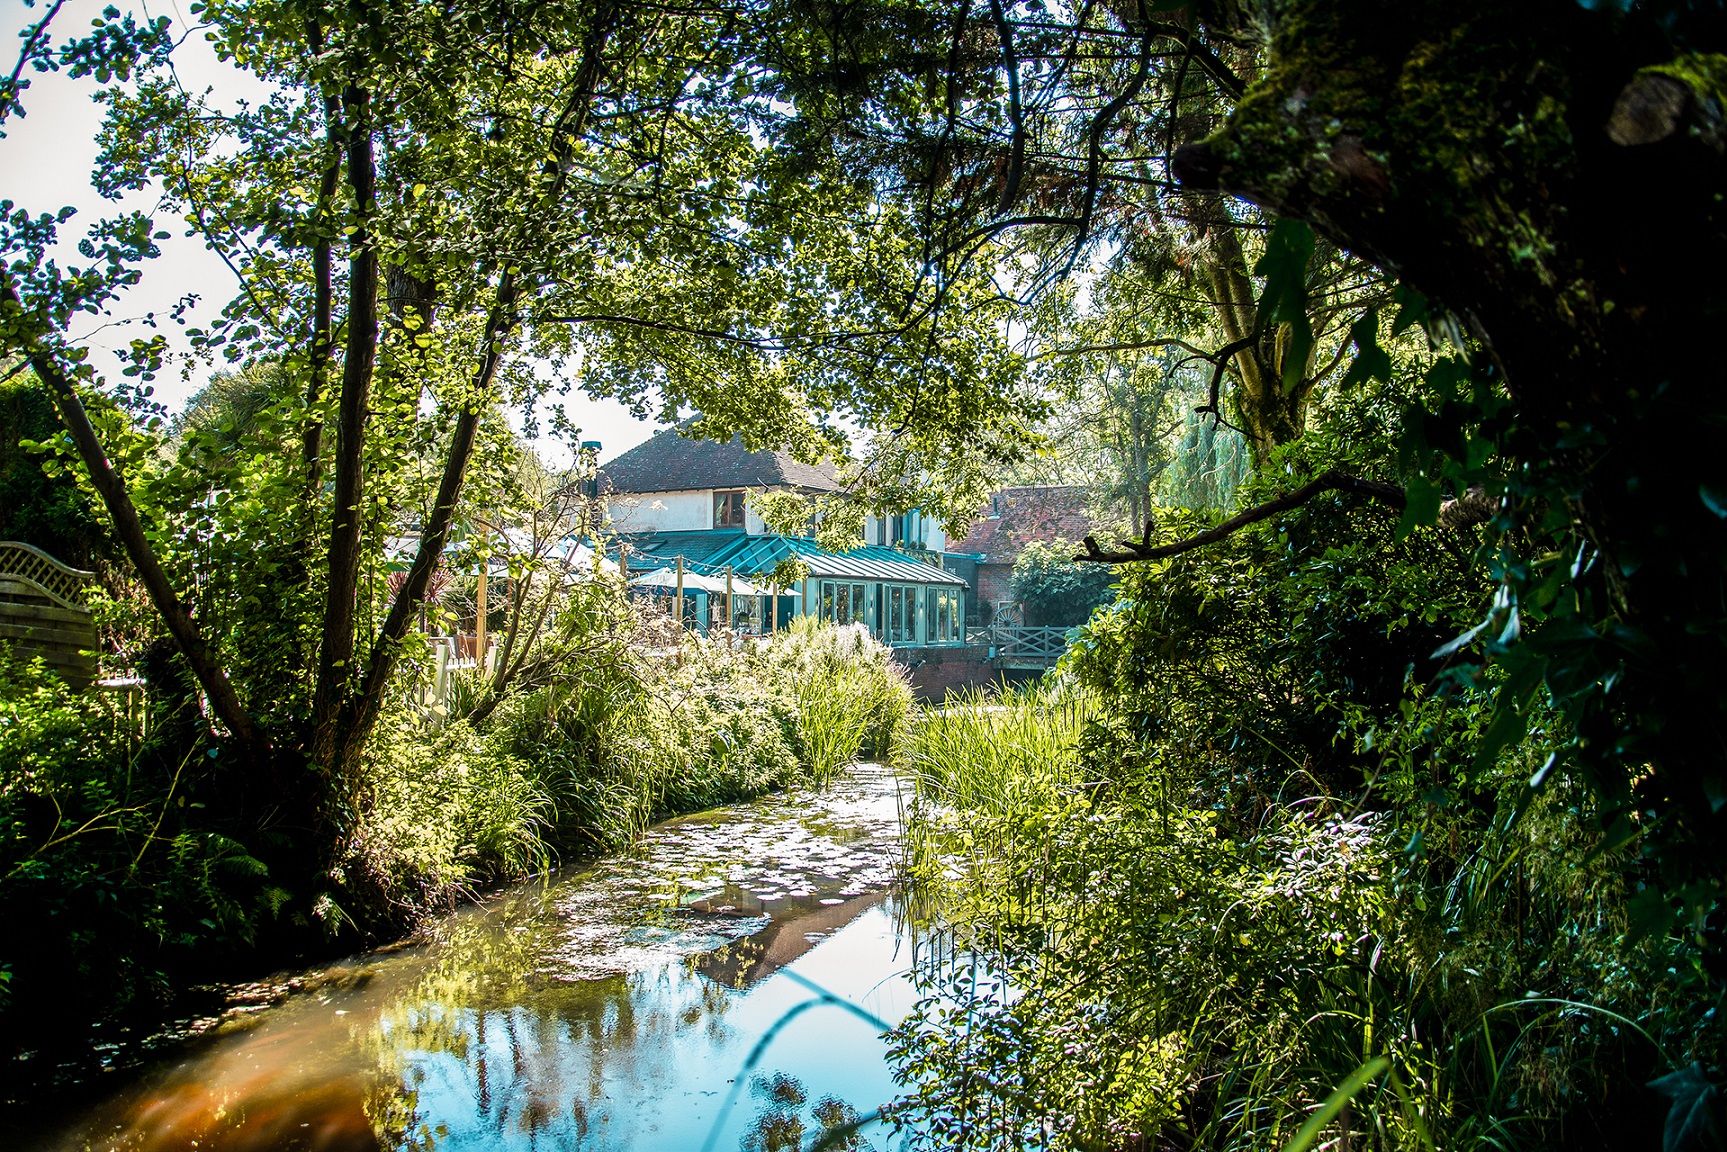 Why The New Forest Should Be At The Top Of Your List For Your Next Couple’s Get Away